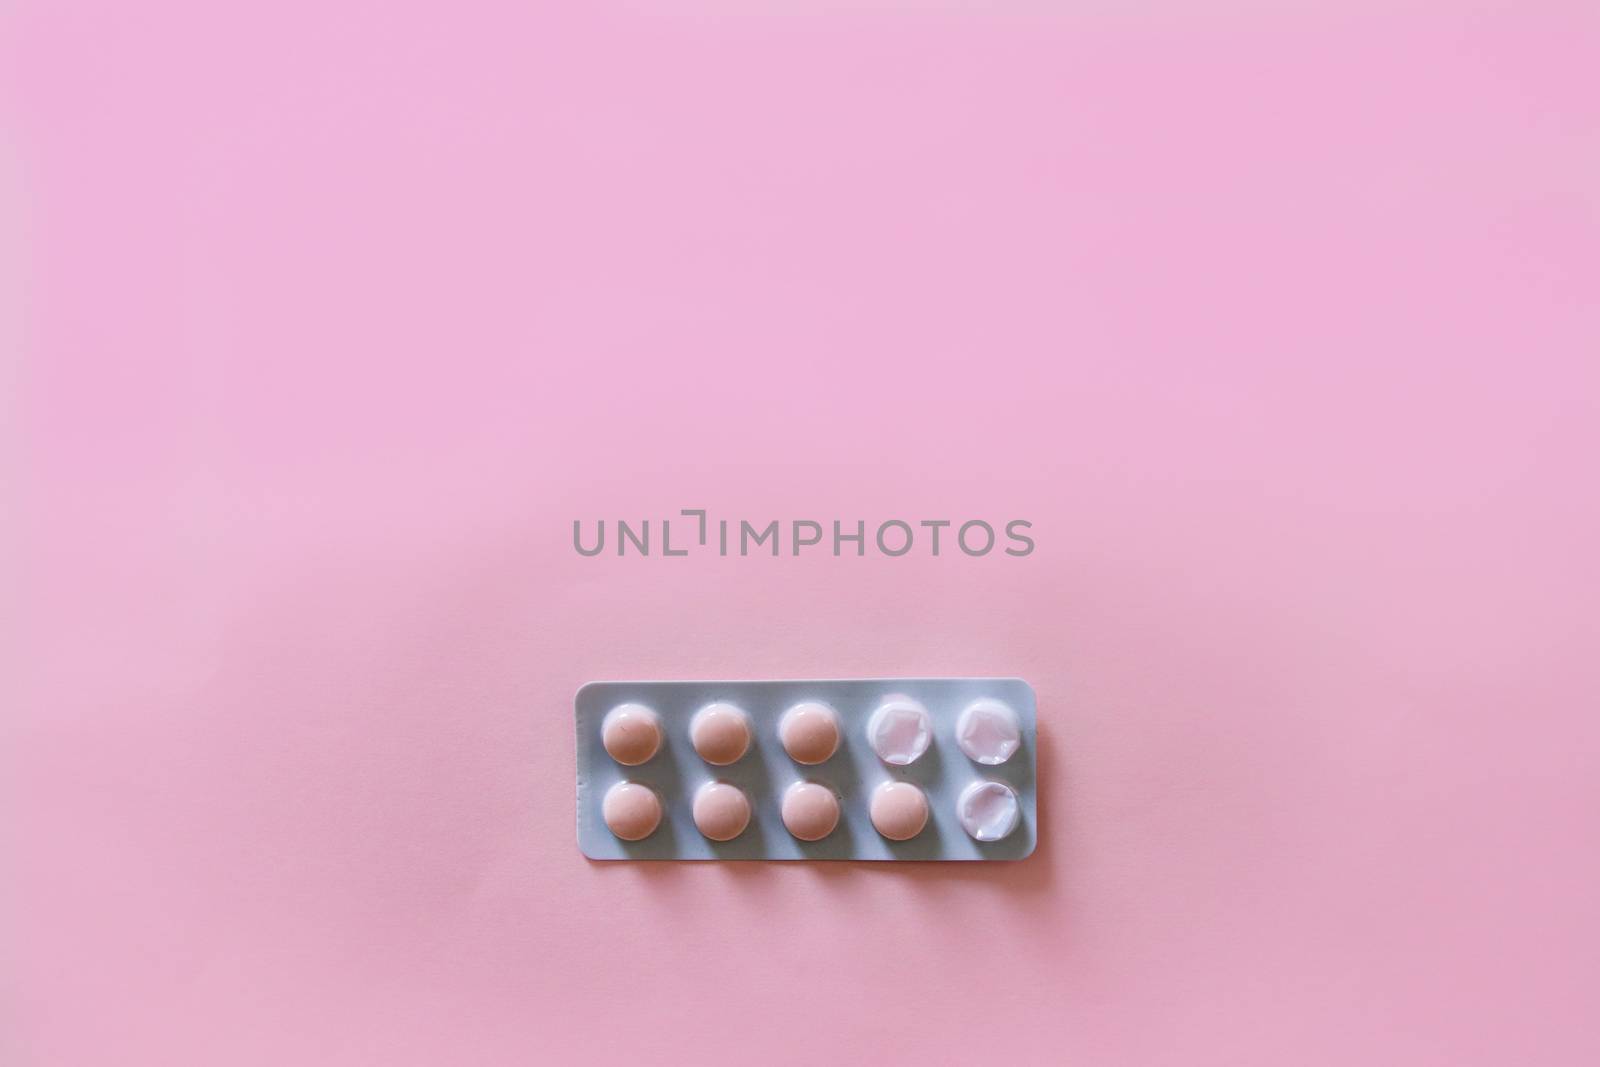 Packet of Pills Against Pink Background